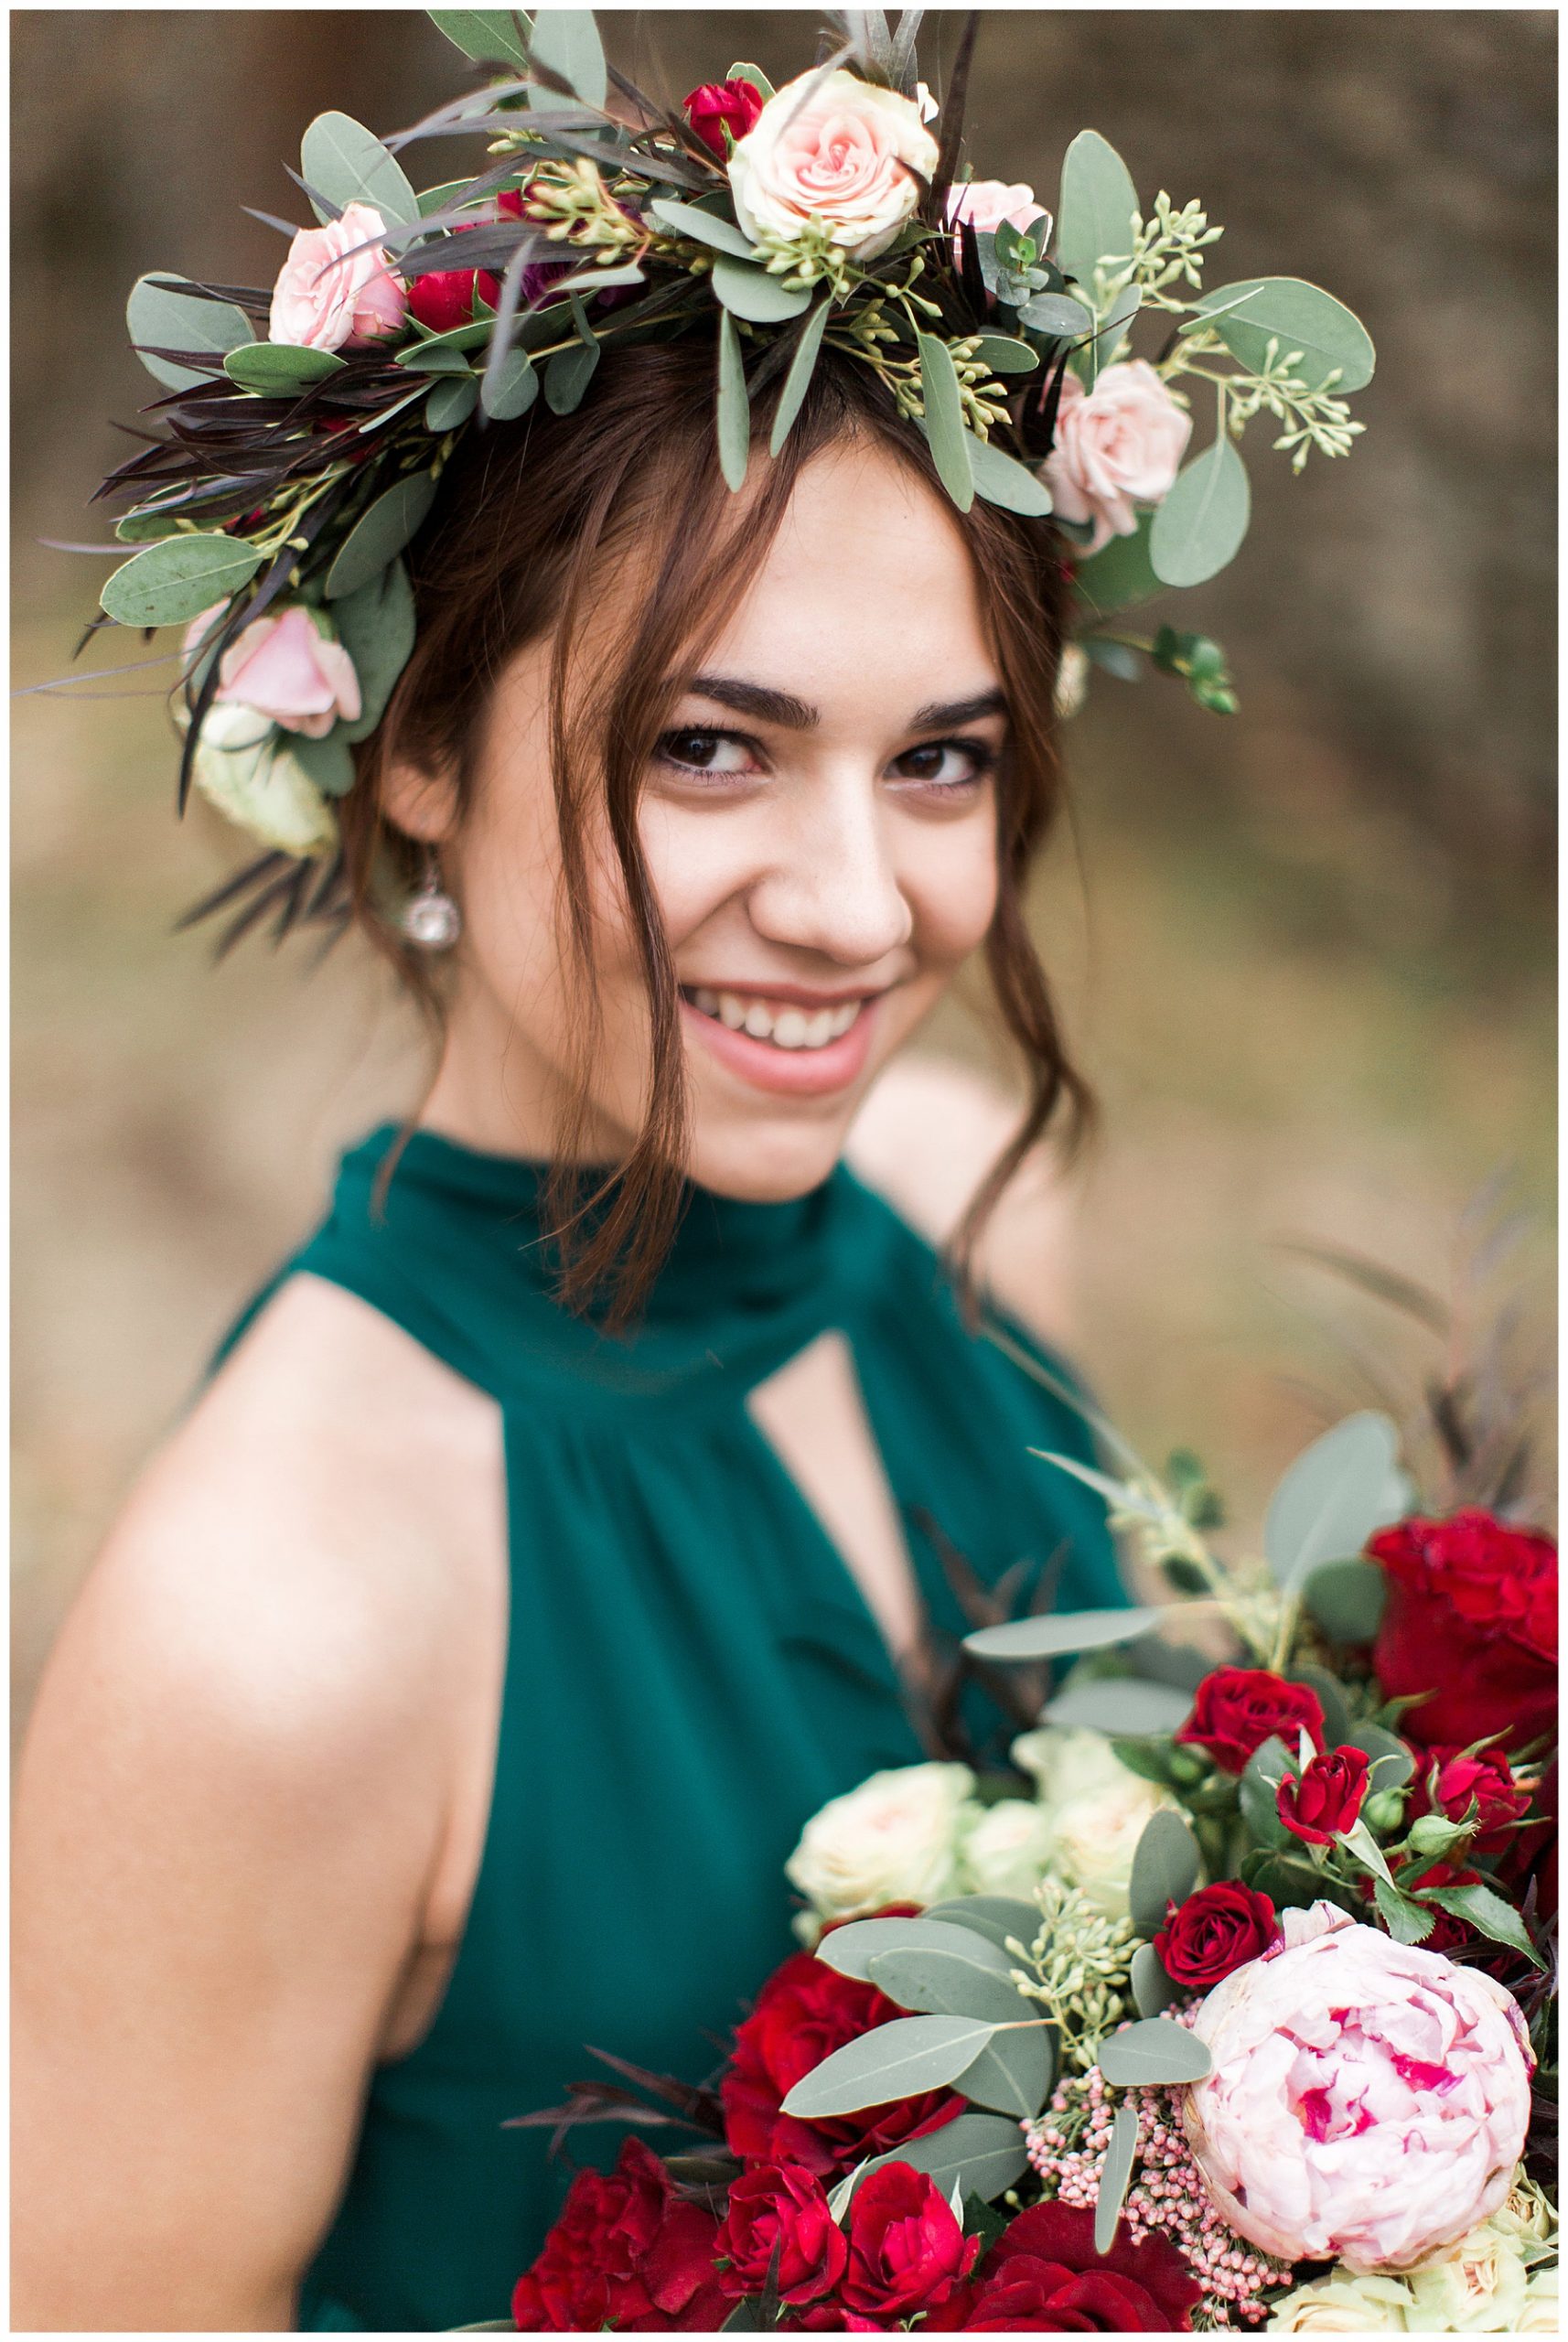 Kristina_Staal_photography_floral_crown_bridal_portrait_Waveny_house_new_Canaan_Connecticut.jpg